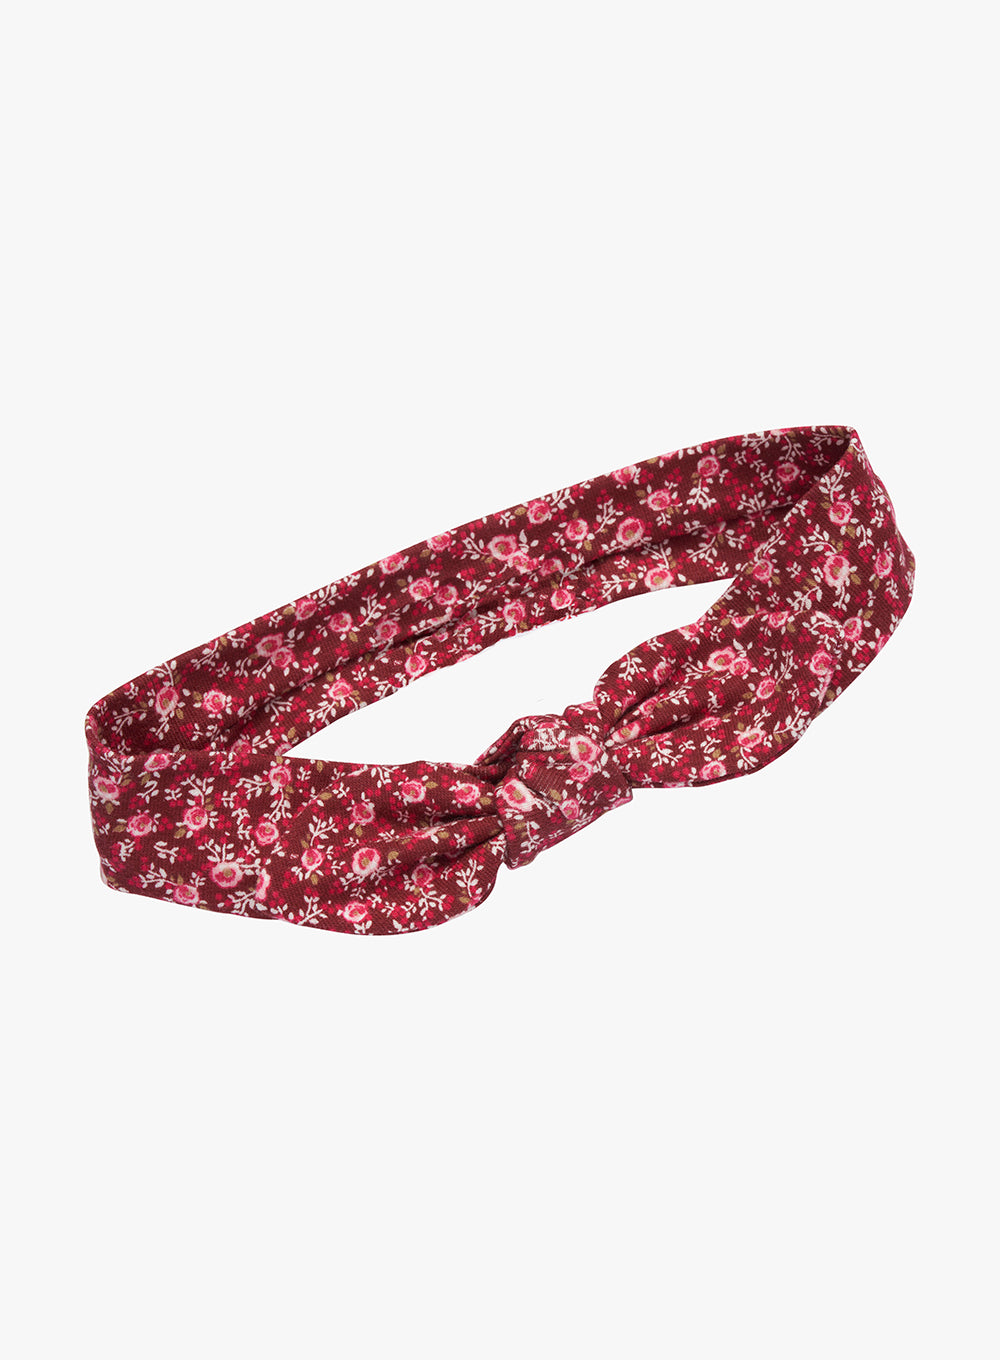 Louise Jersey Bow Headband in Berry Floral